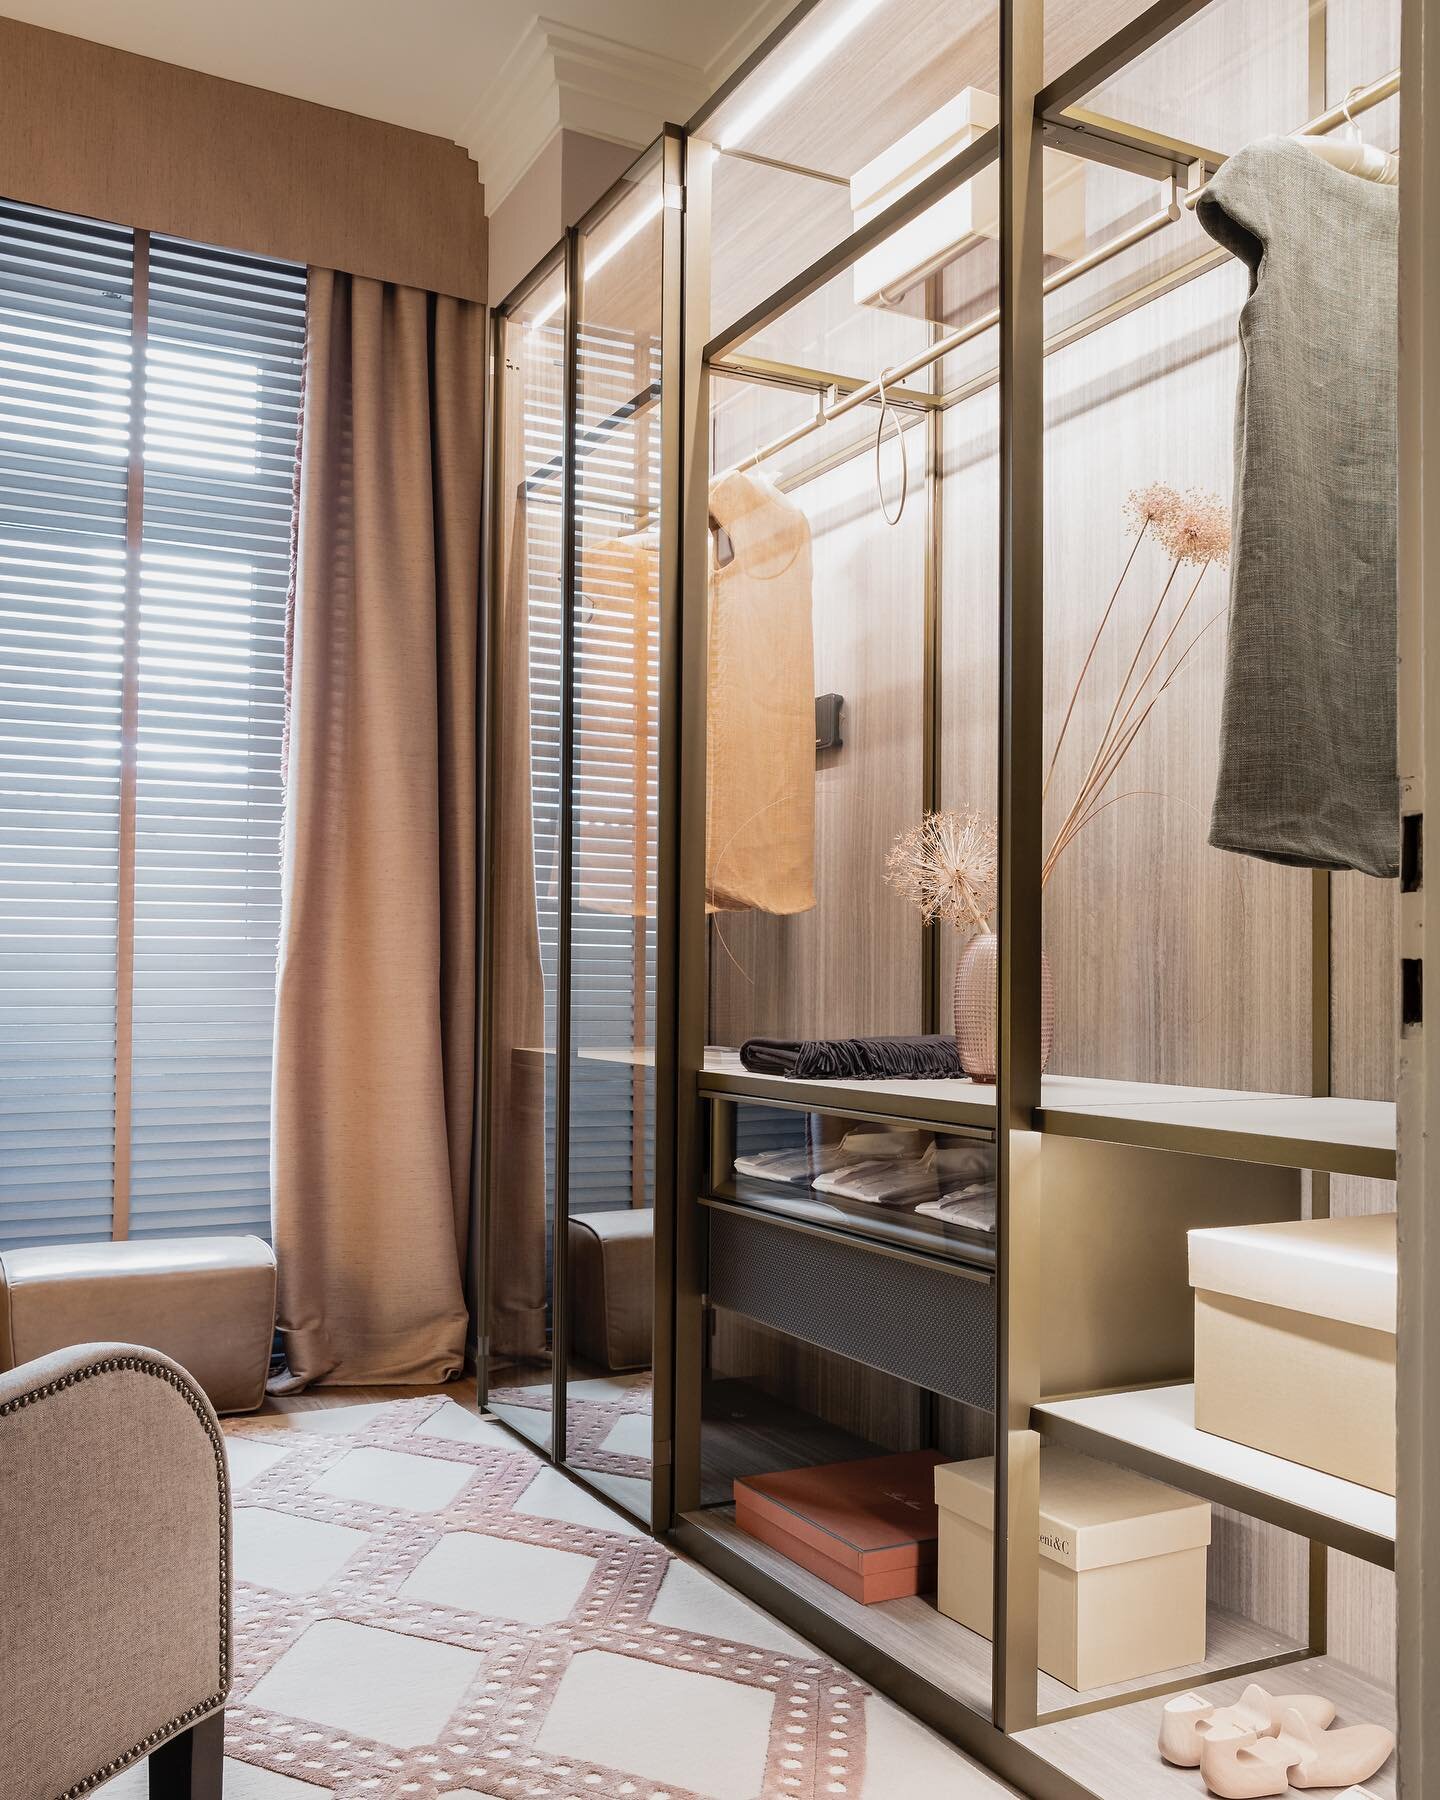 Beautiful wardrobe by @moltenidada at our Showroom in Frankfurt - Visit us and have a look at it in real Life!
Carpet: @therugcompany
.
#interiordesign #wardrobe #molteni #interior #design #style #frankfurt